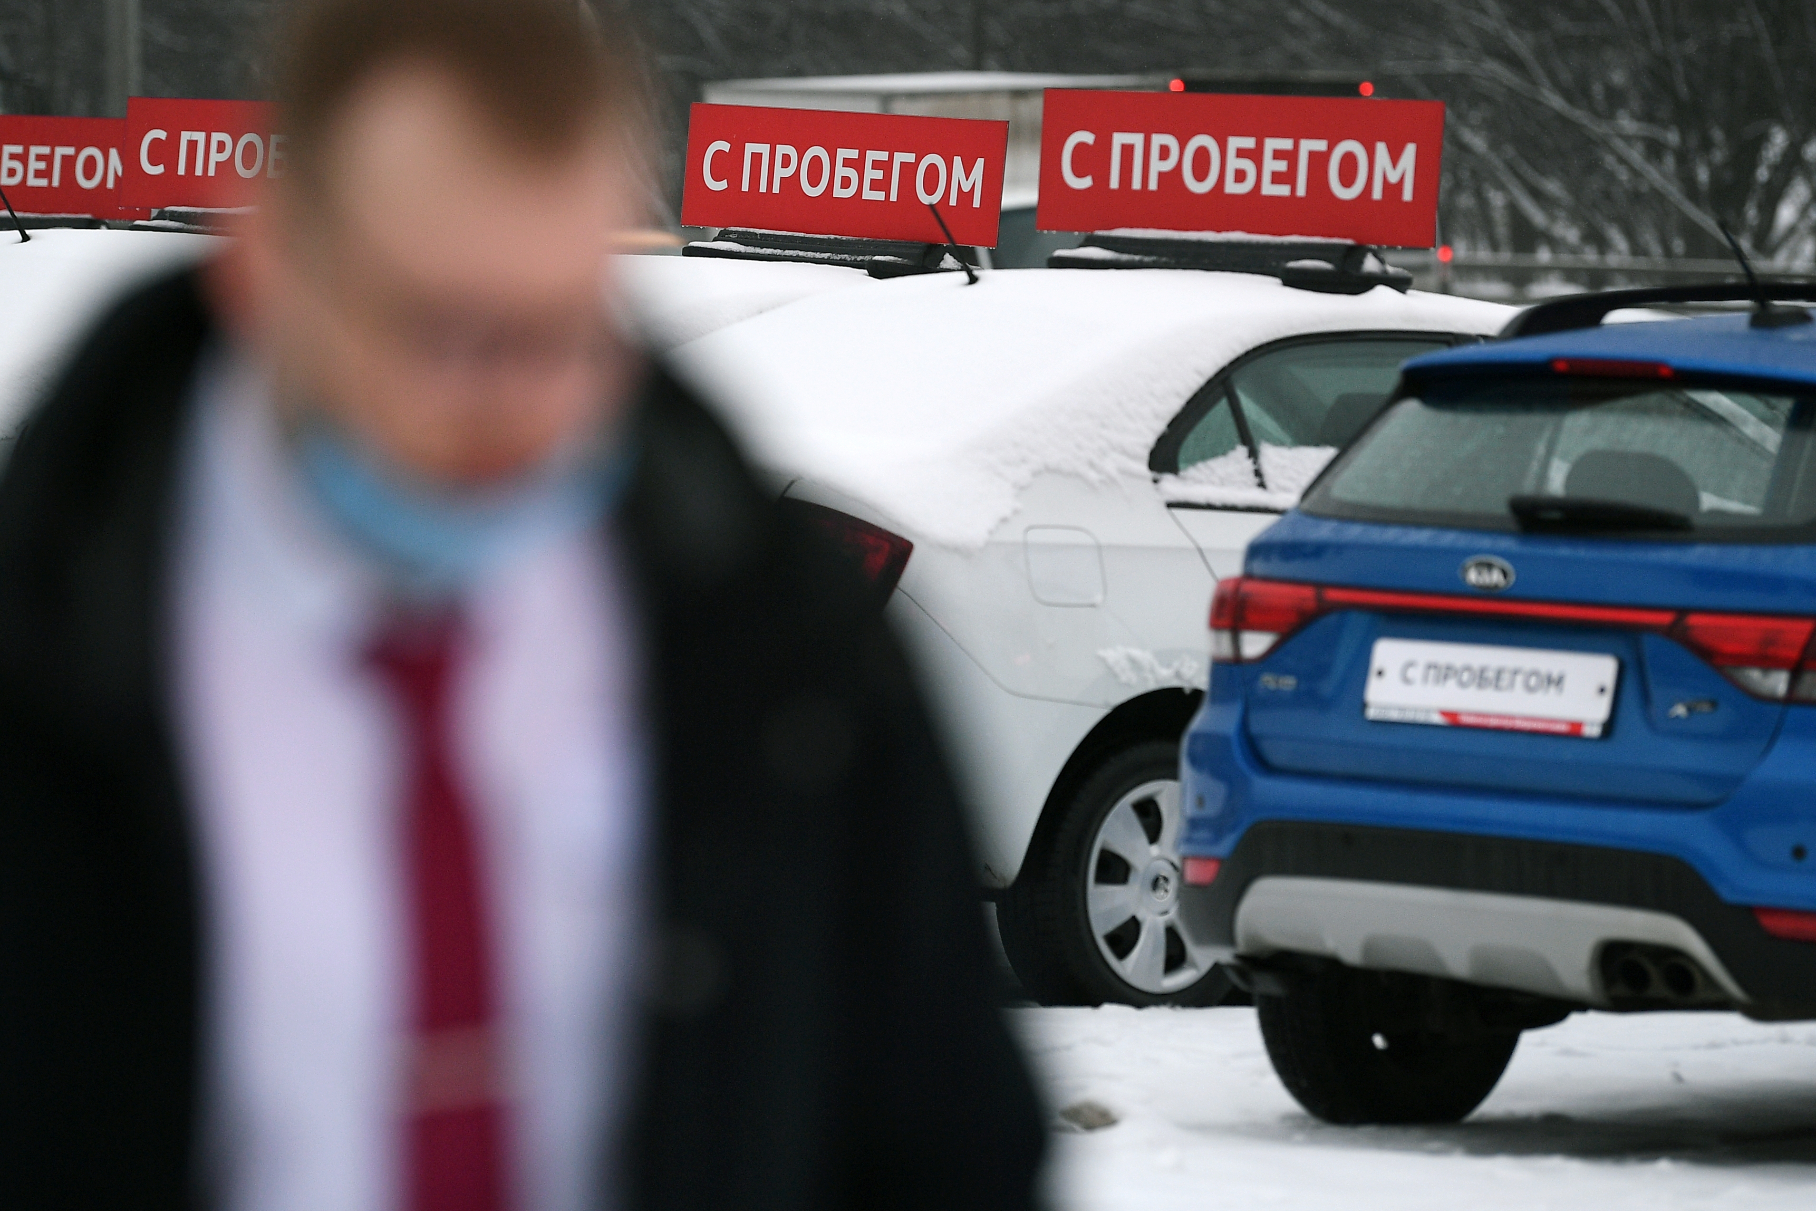 The expert named five indestructible used cars worth 500 thousand rubles